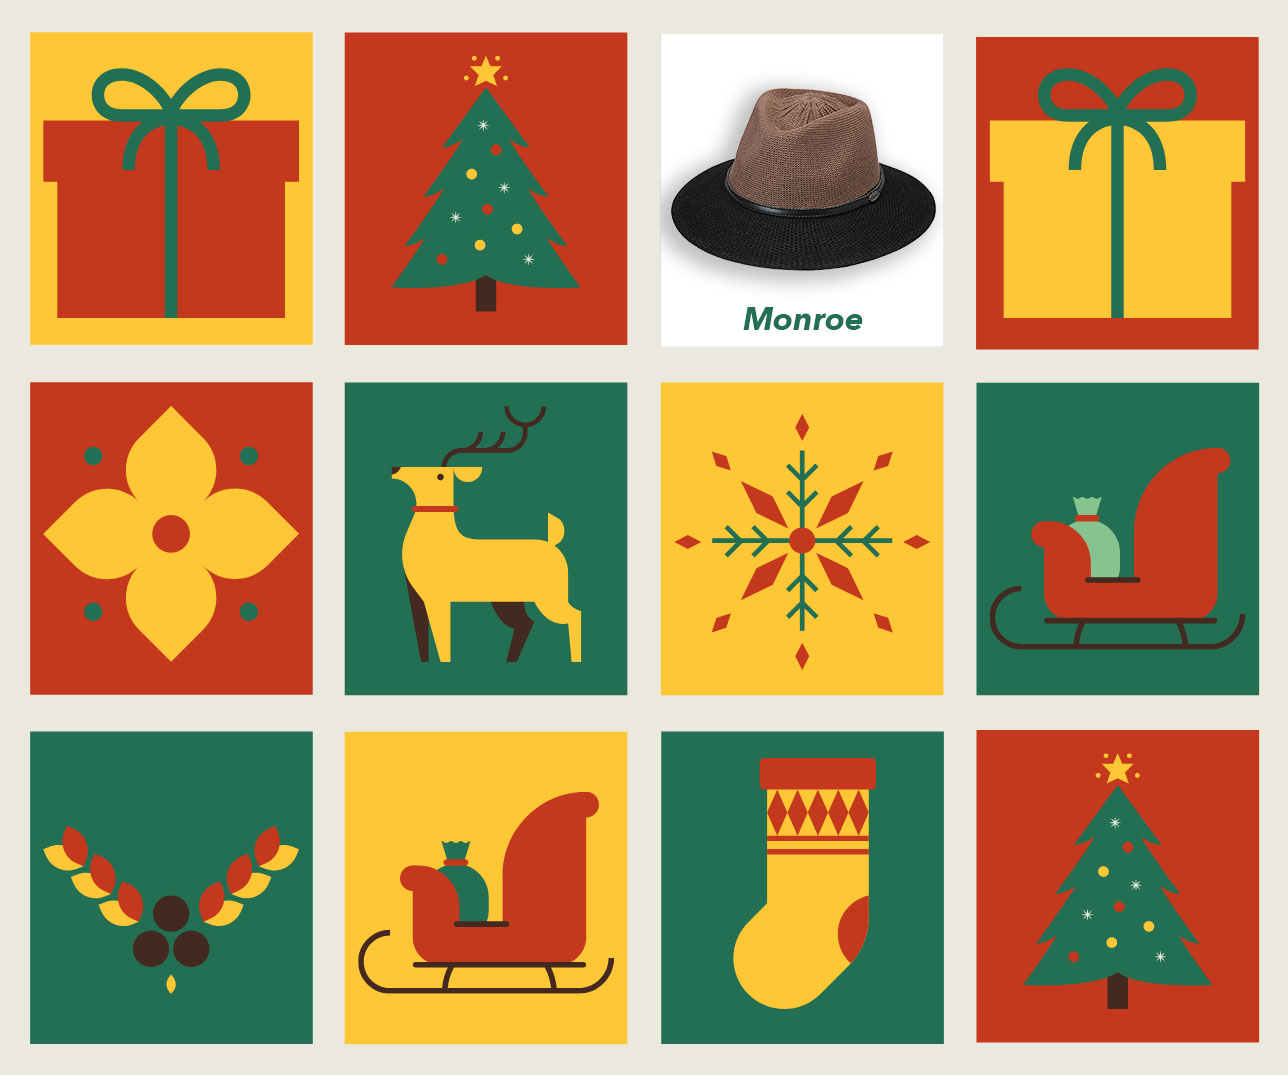 12 Days of Hats - 15% off Monroe